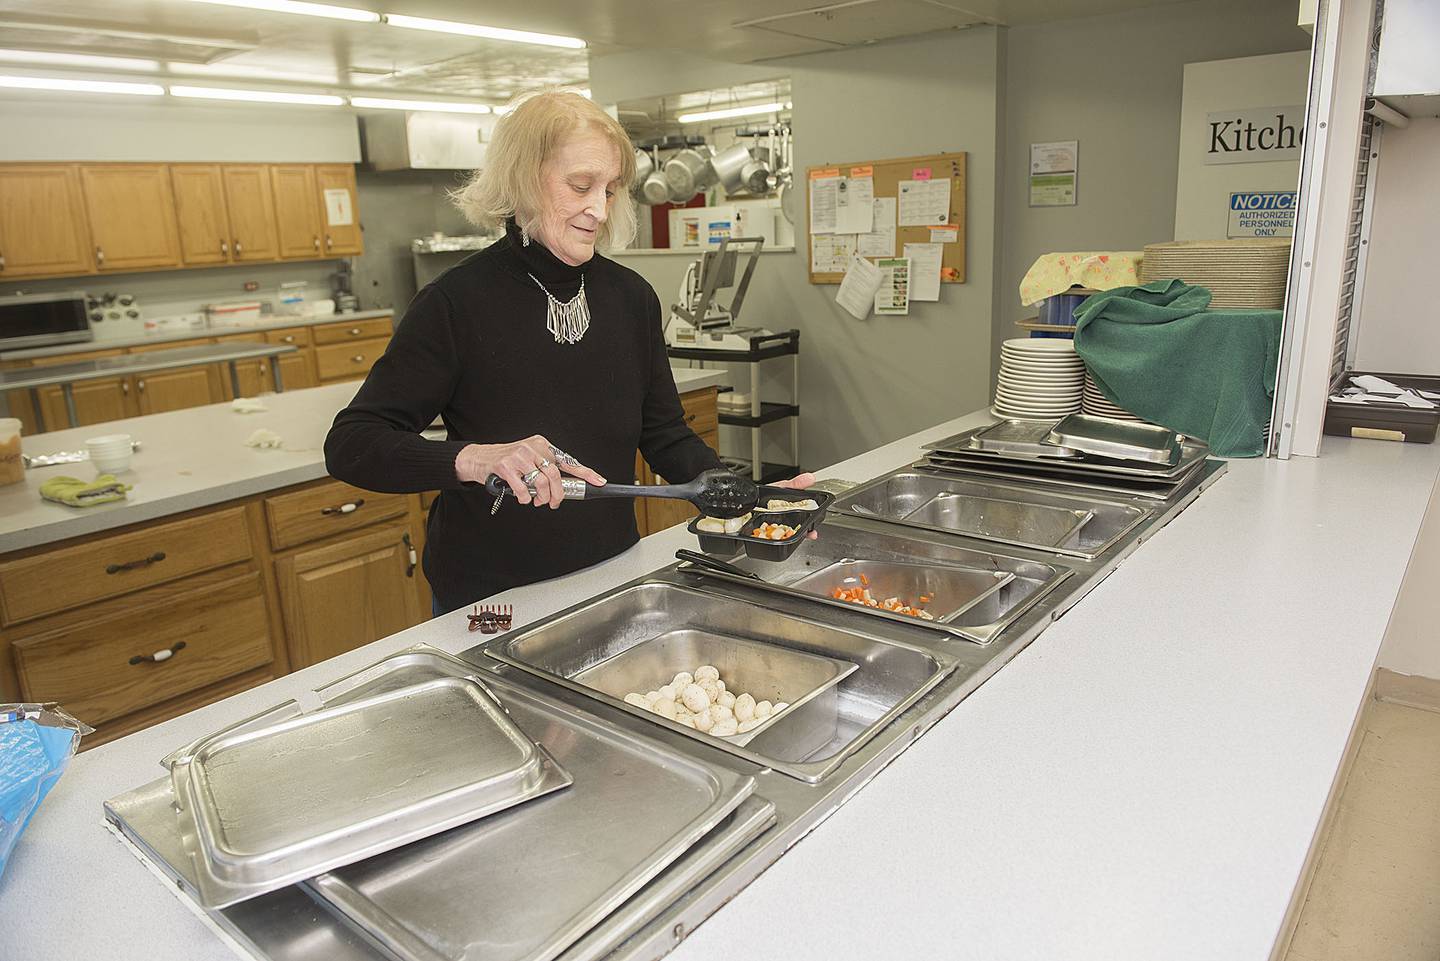 Linda Pennell dishes up food through the Golden Meals program at the senior center. Food is served Monday to Thursday from 11 a.m. to Noon for a small fee.